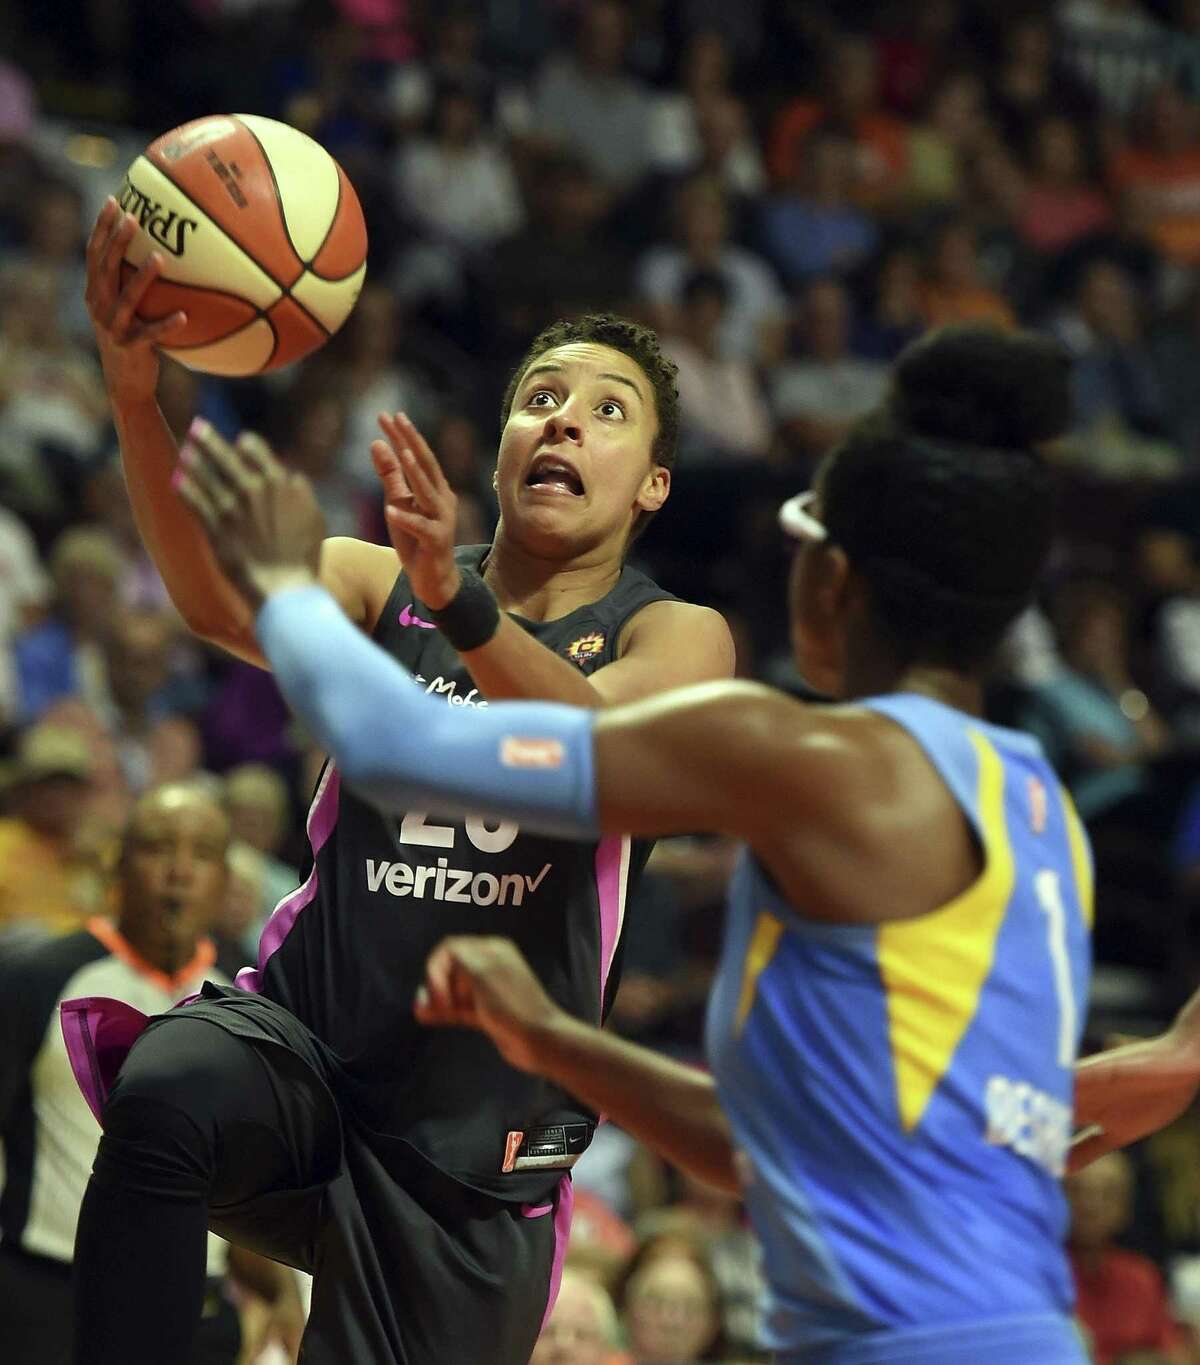 Connecticut Sun guard Layshia Clarendon, left, drives to the basket as Chicago Sky guard Diamon DeShields defends in the second half on Aug. 12.